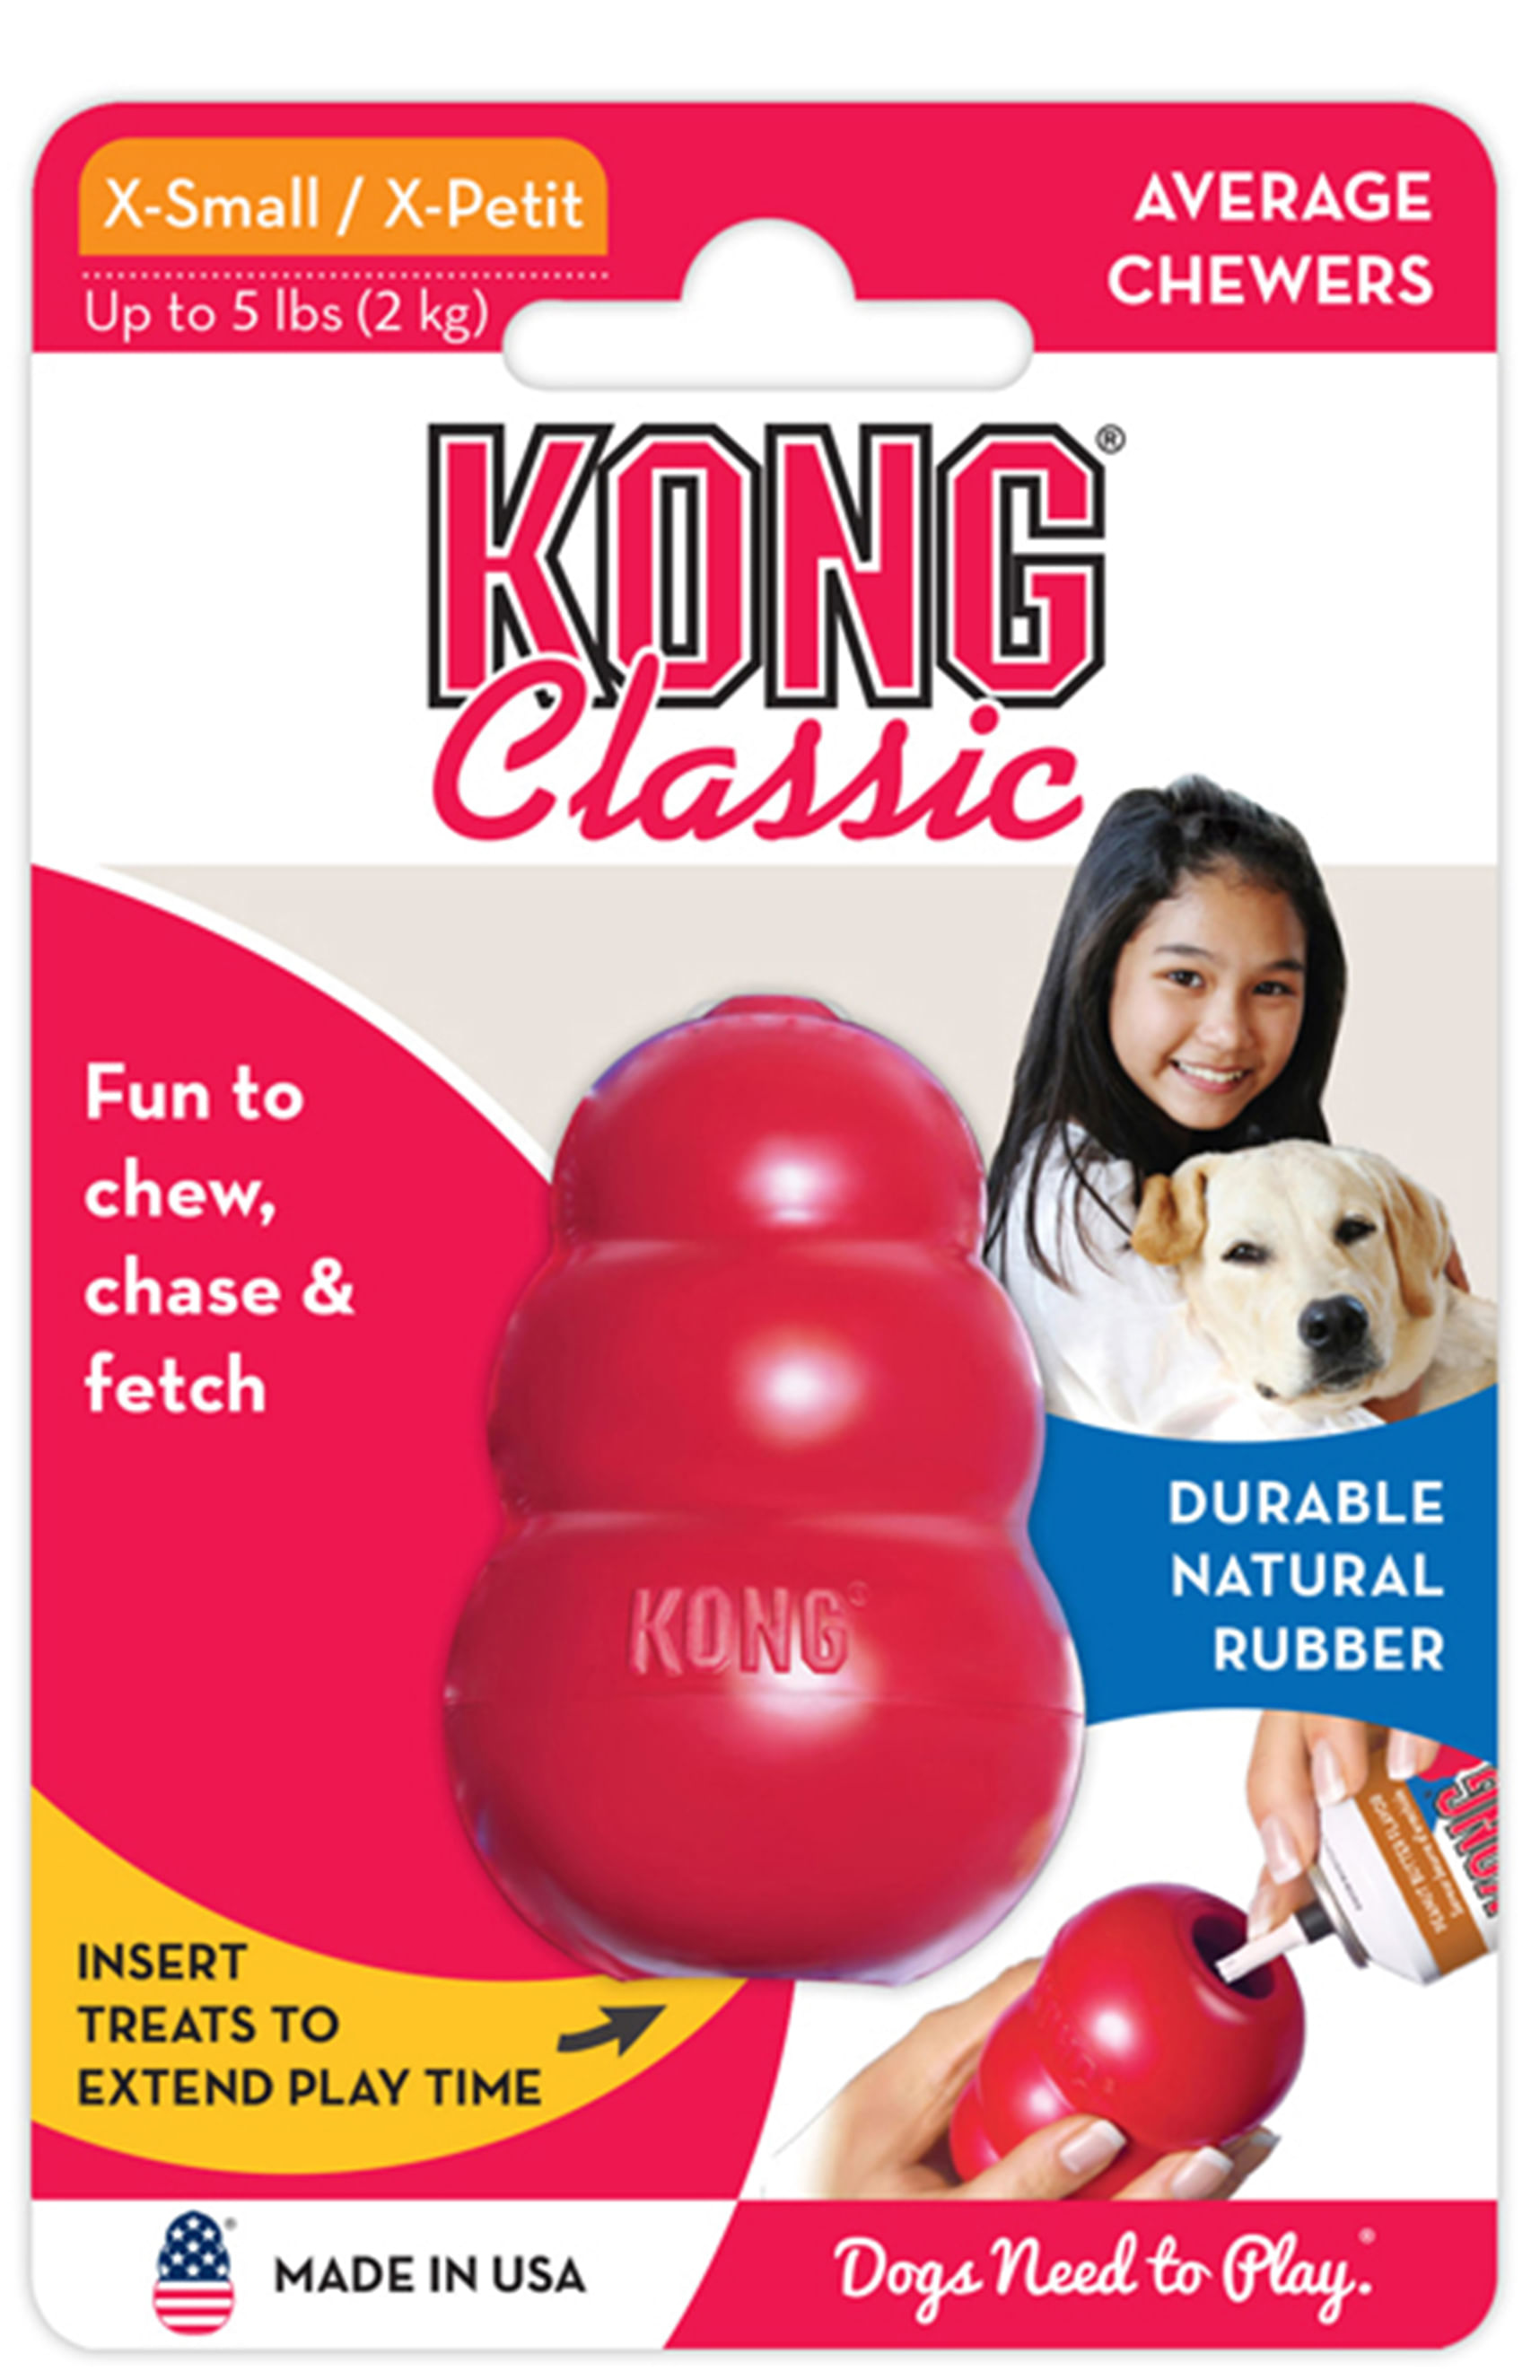 KONG Classic Dog Toy (Red) - Jeffers